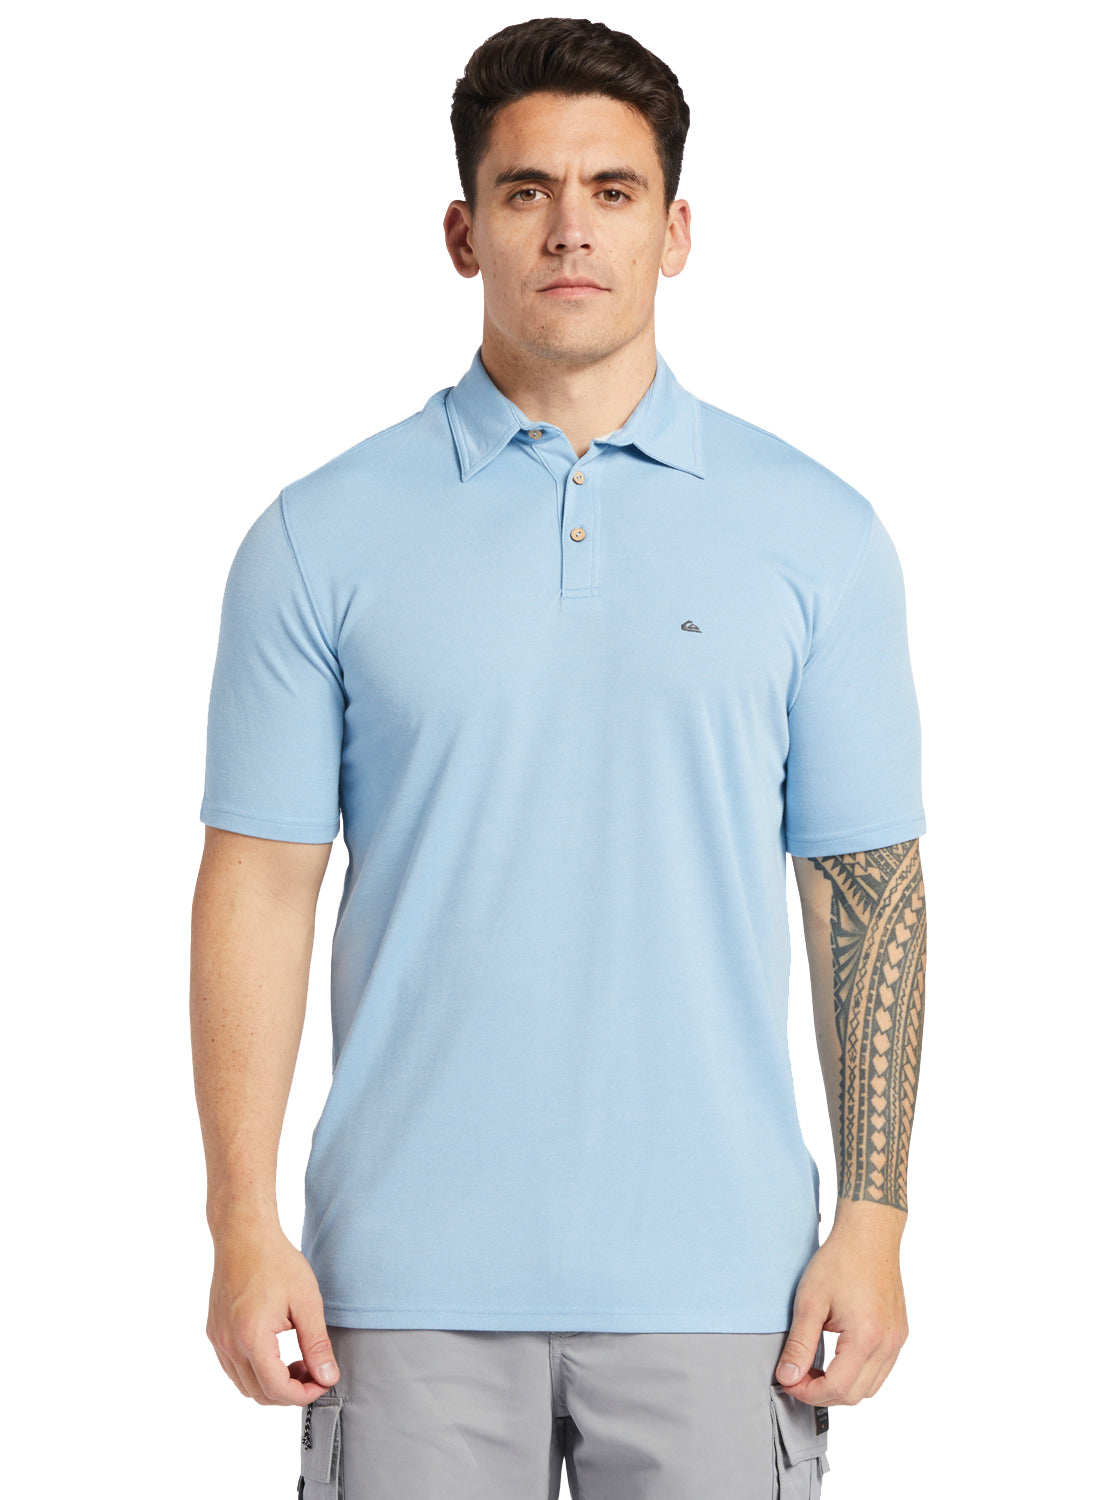 Quiksilver Waterman Waterpolo SS Polo Shirt BHC0 M